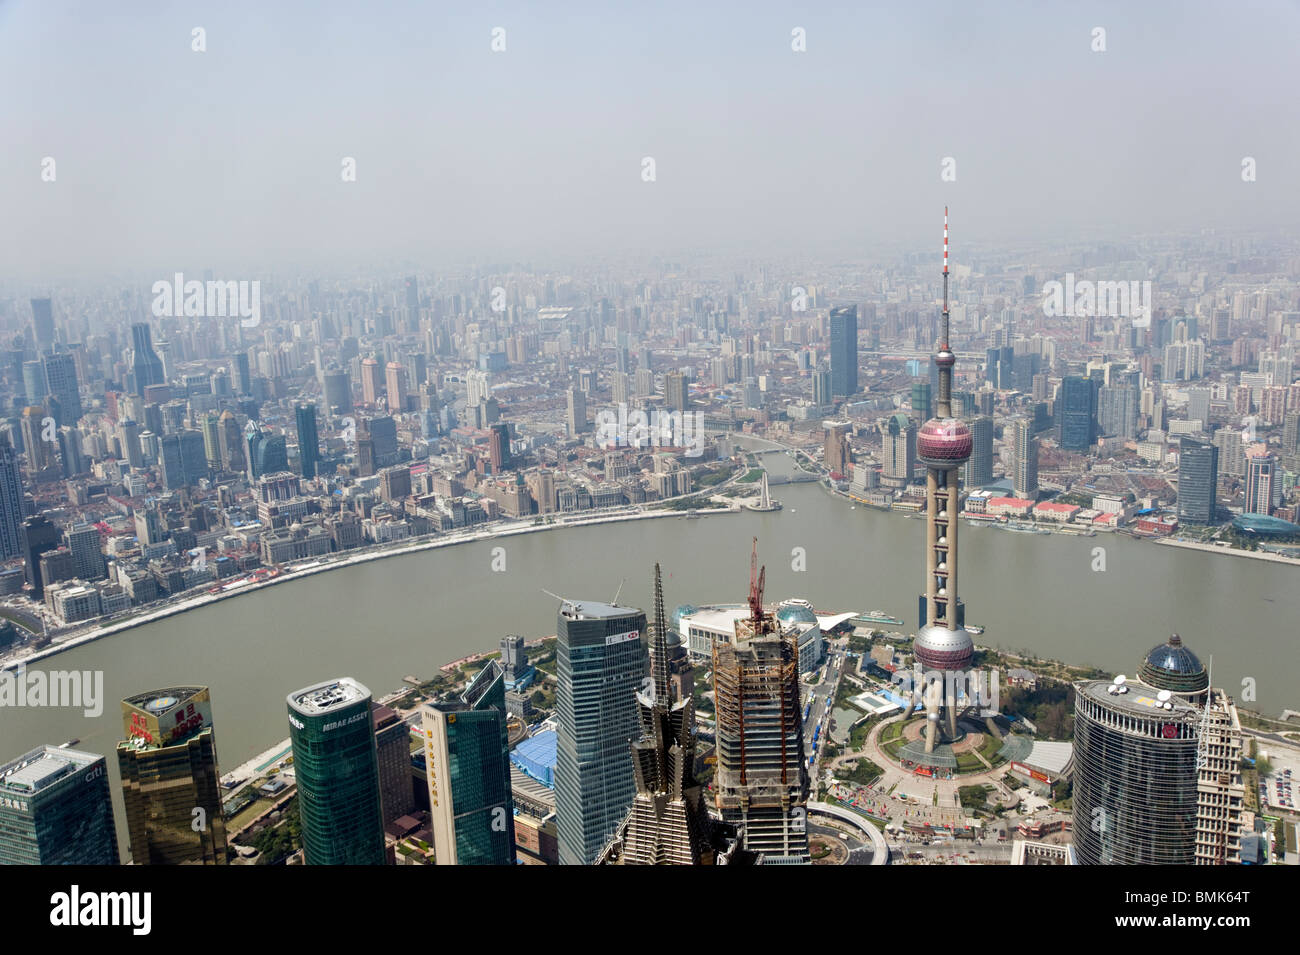 Smog and pollution over the city viewed from above, Shanghai, China Stock Photo